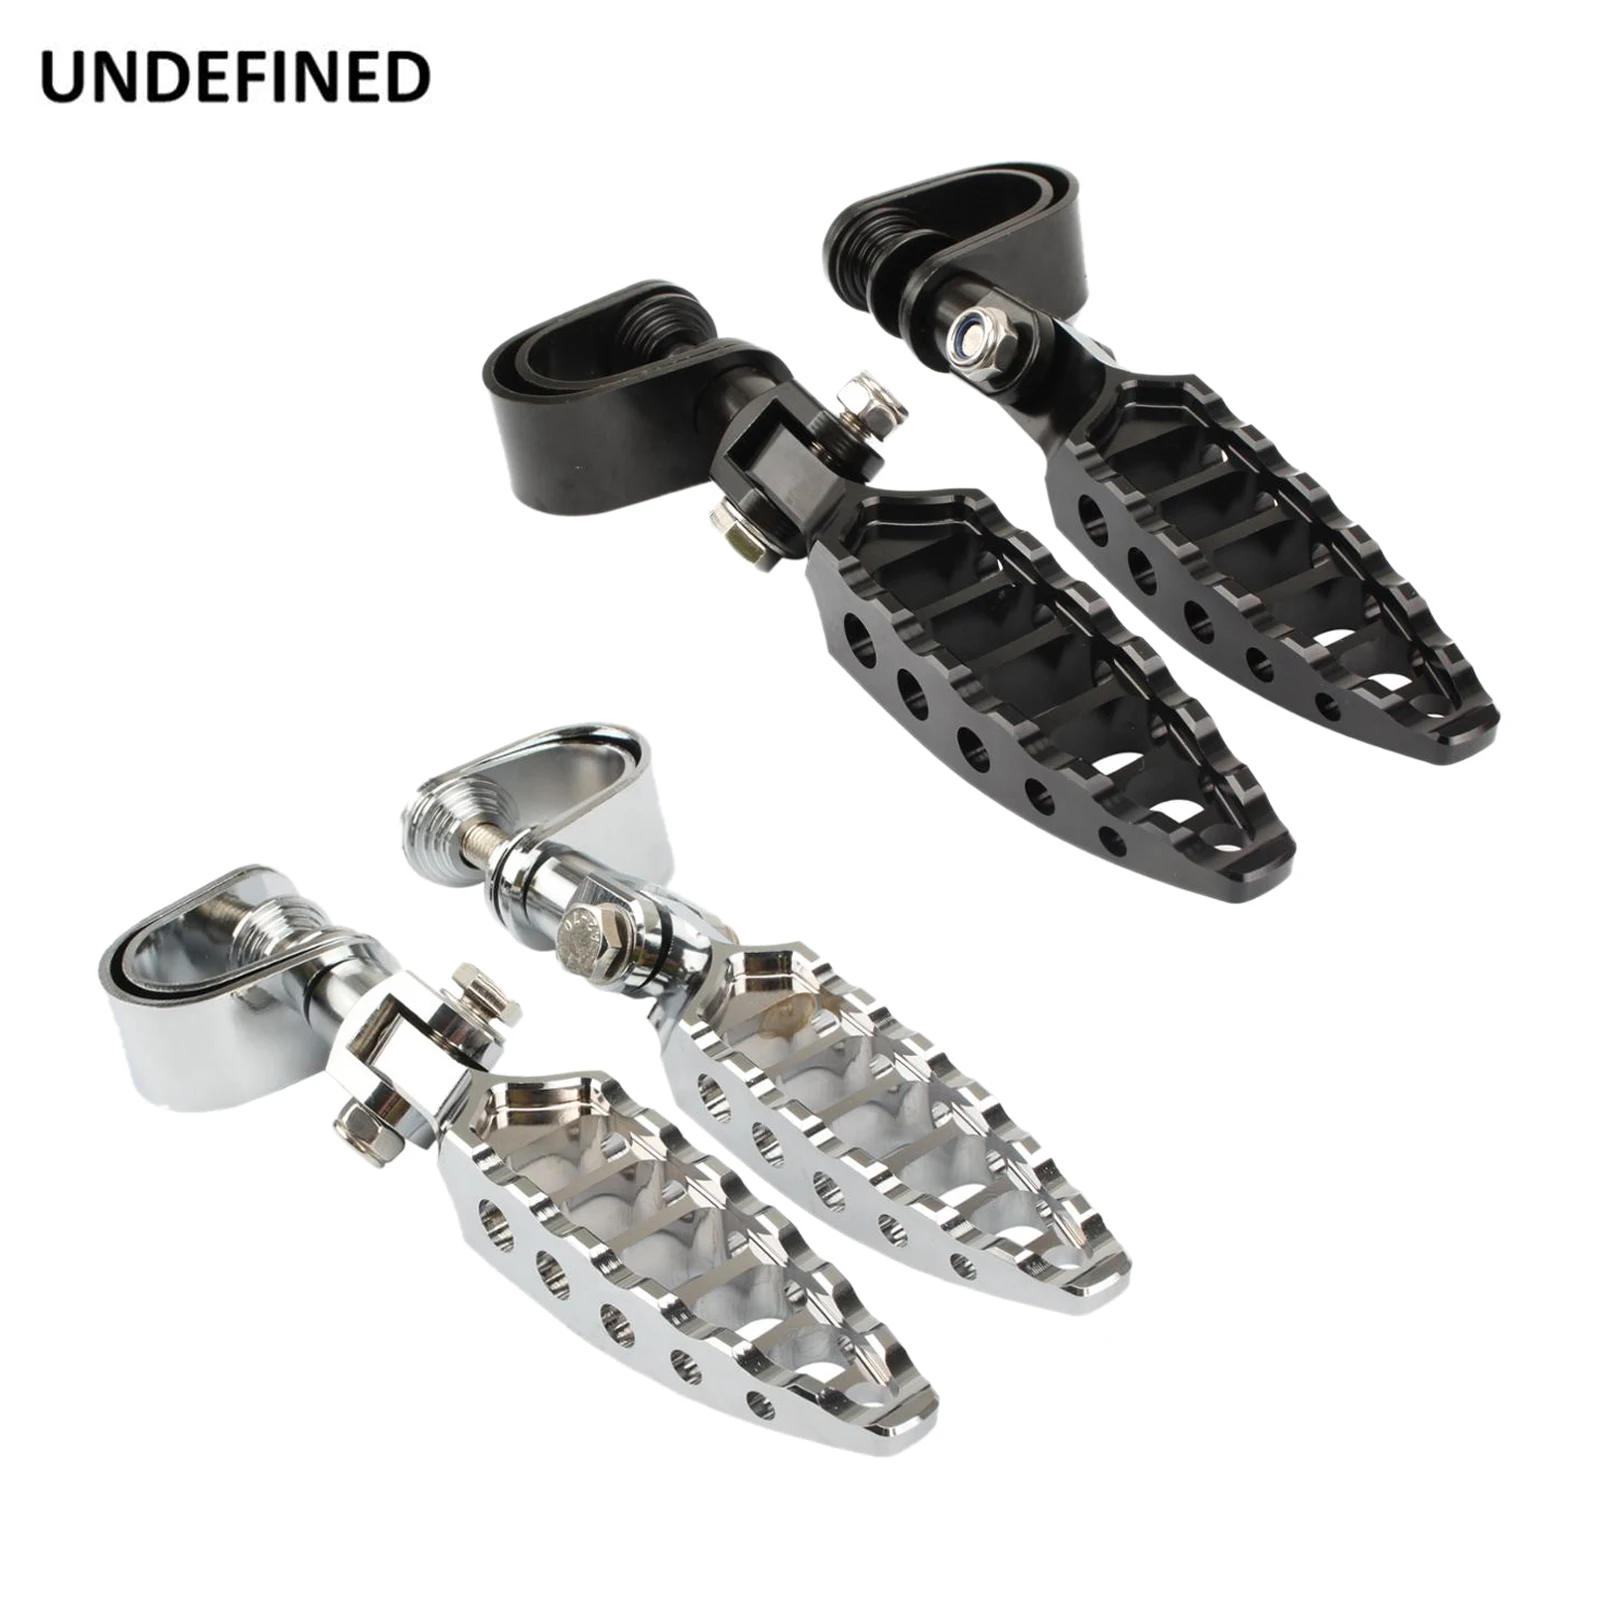 

45 Degrees Foot Pegs Male-Mount Footrest Highway Footpegs Engine Guard Clamp 25mm 32mm For Harley Sportster Dyna Softail Touring